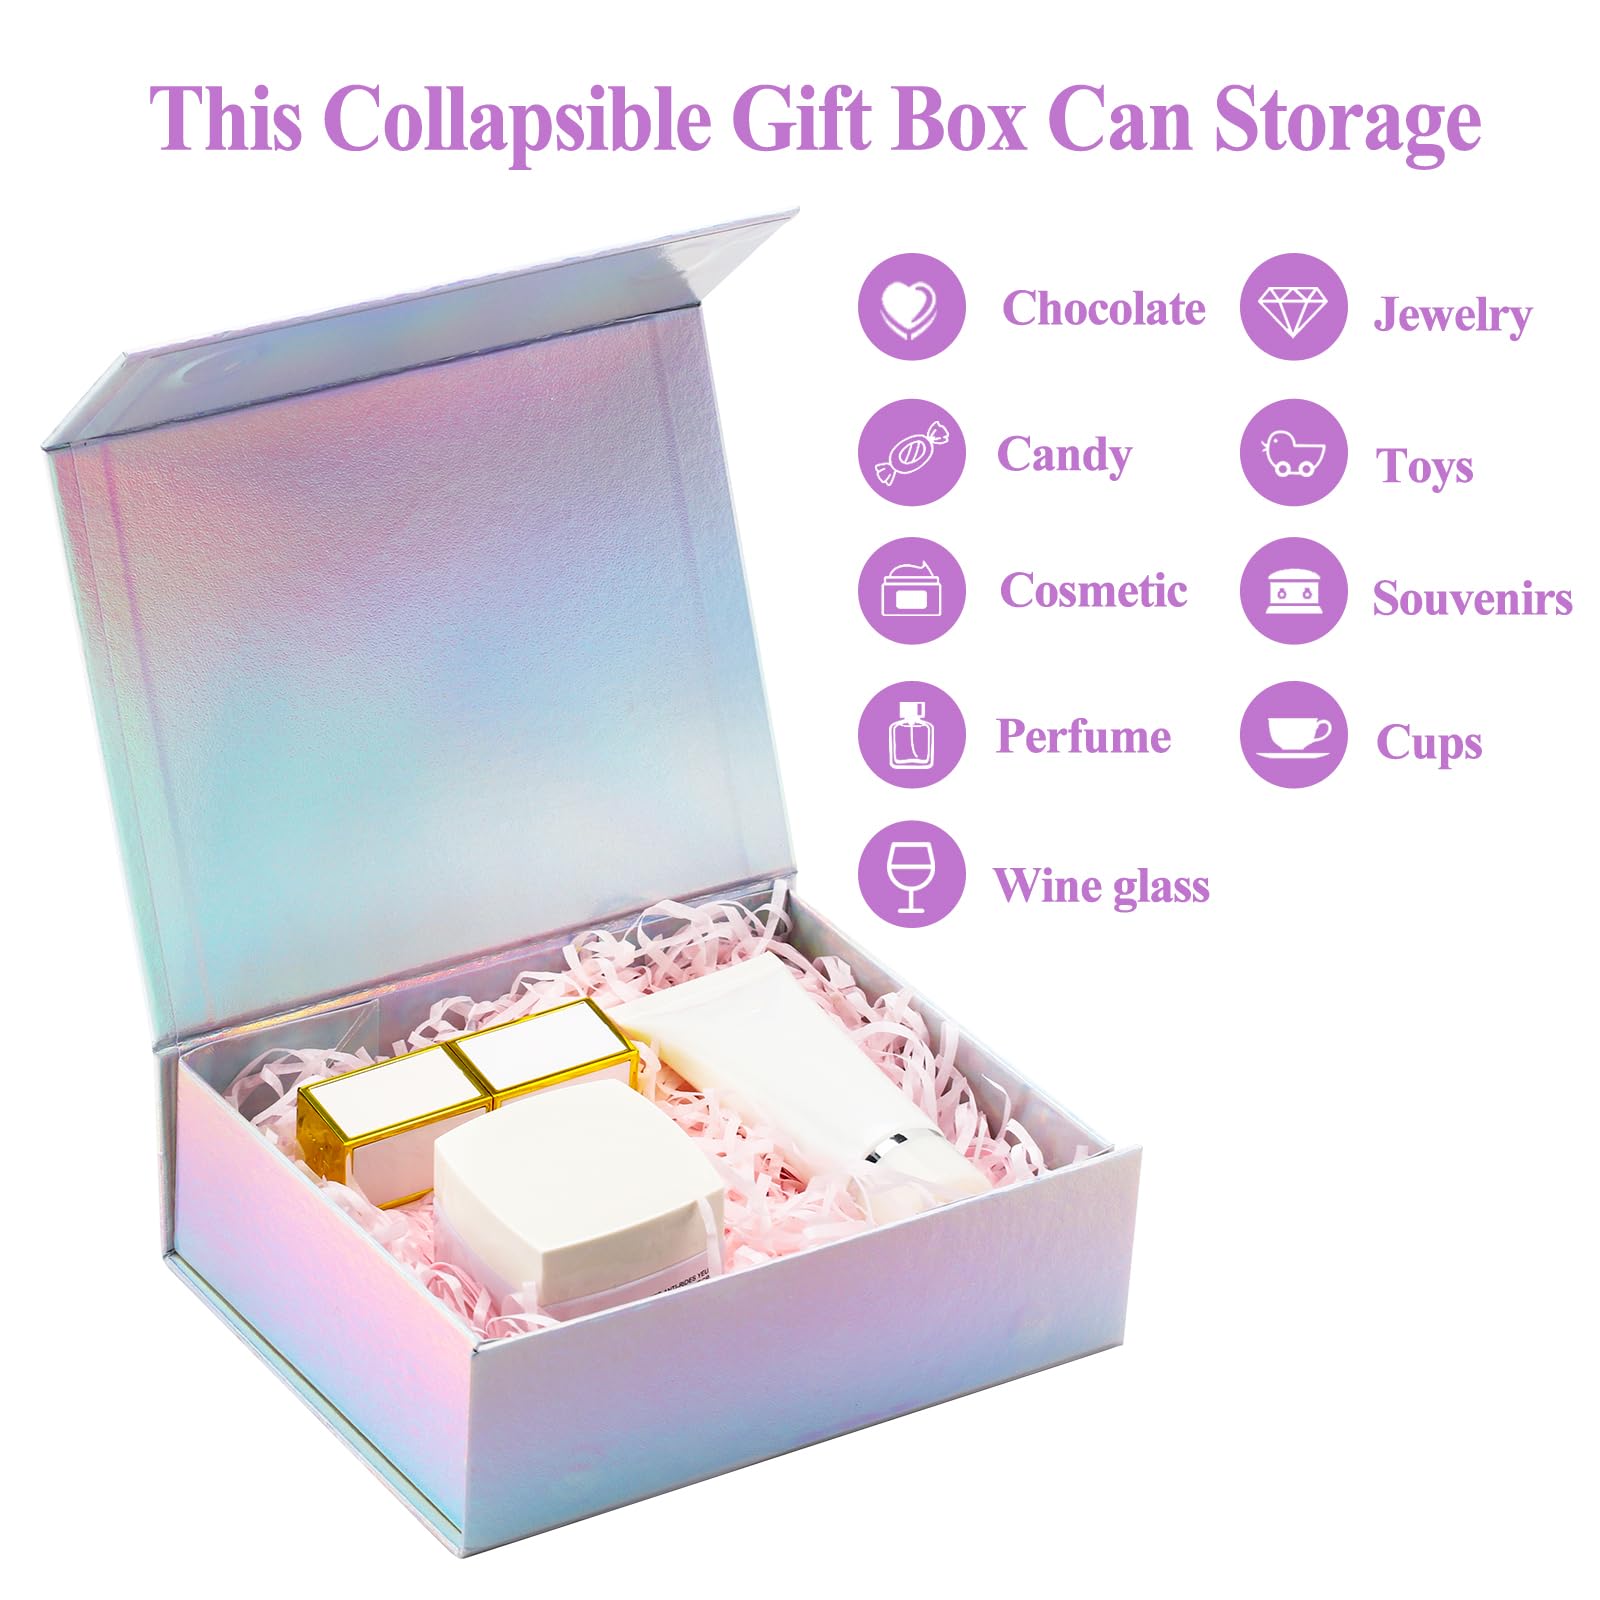 6.7x5.5x2.2 Inch Small Luxury Folding Jewelry Christmas Collapsible Paper Packaging Gift Box With Magnetic Closure Lid